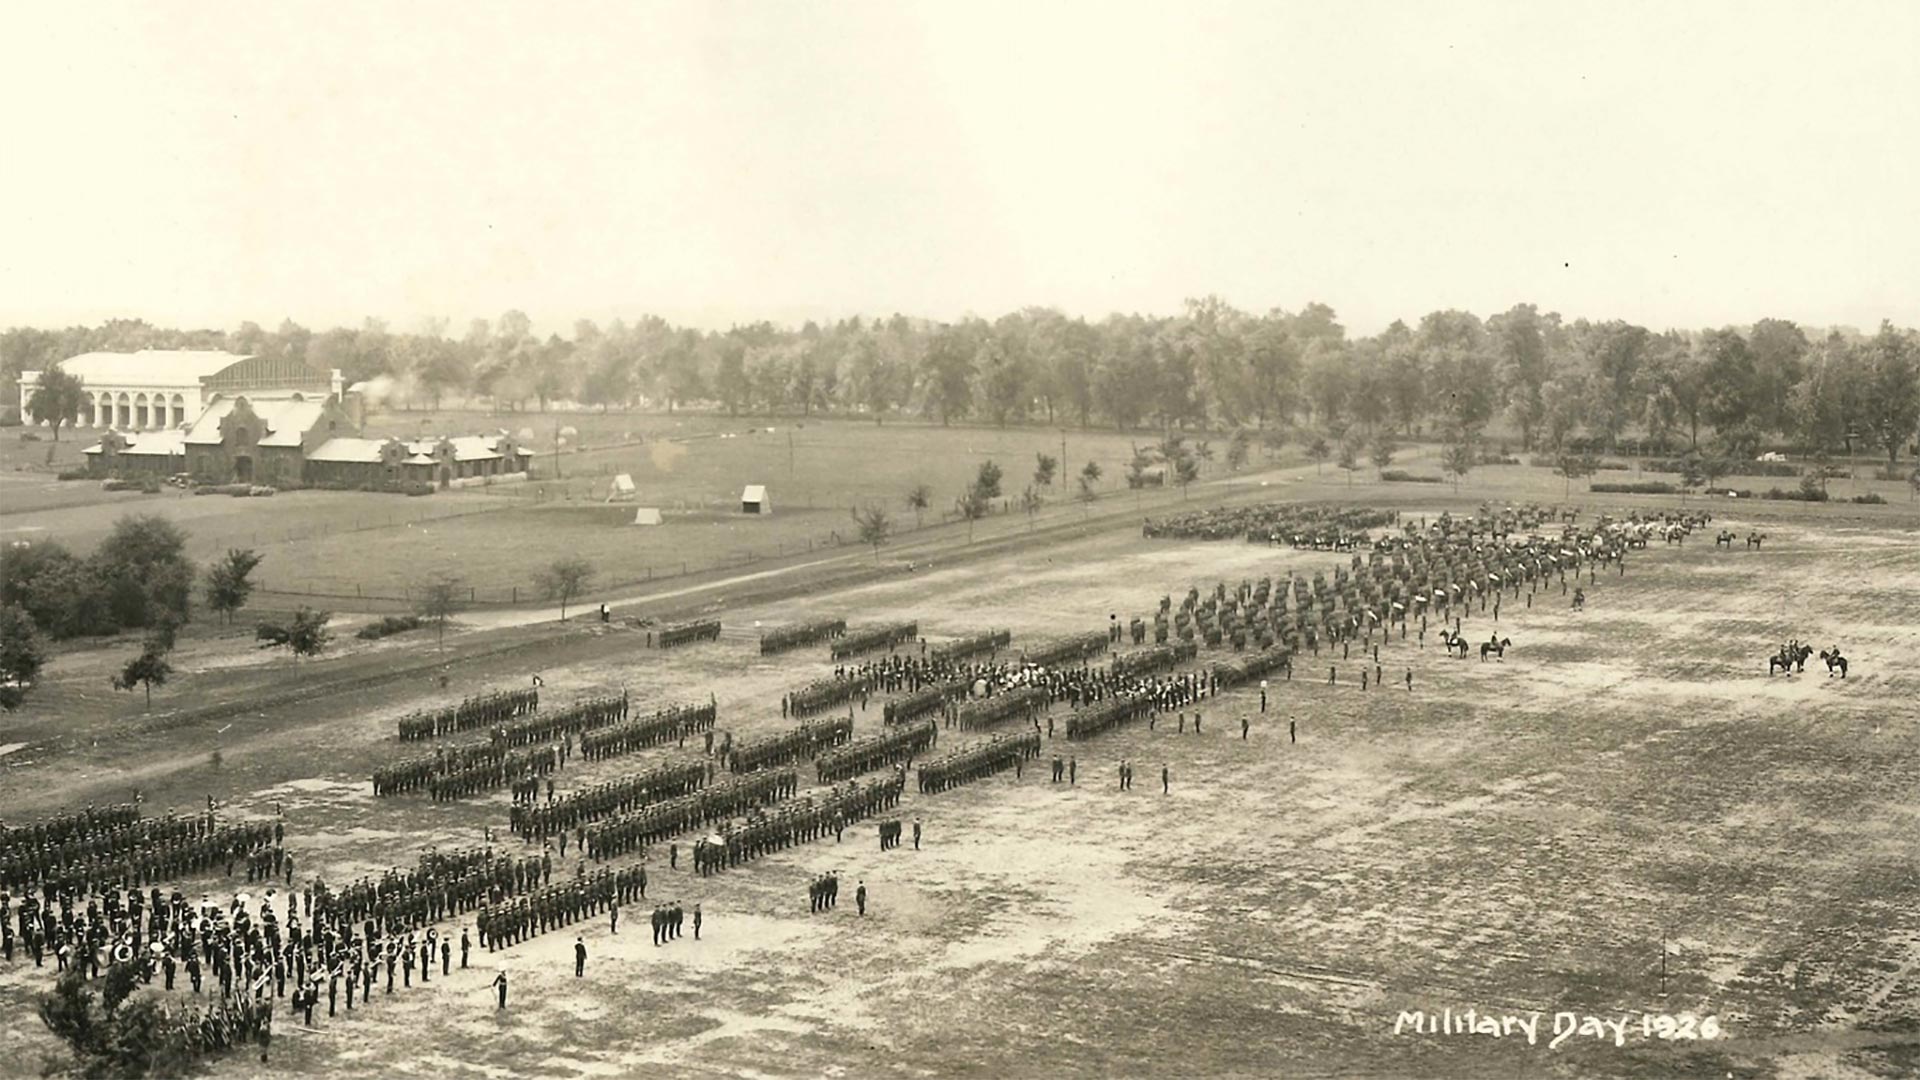 Military Day 1926: old photo of military drill with hundreds of soldiersl on a wide field